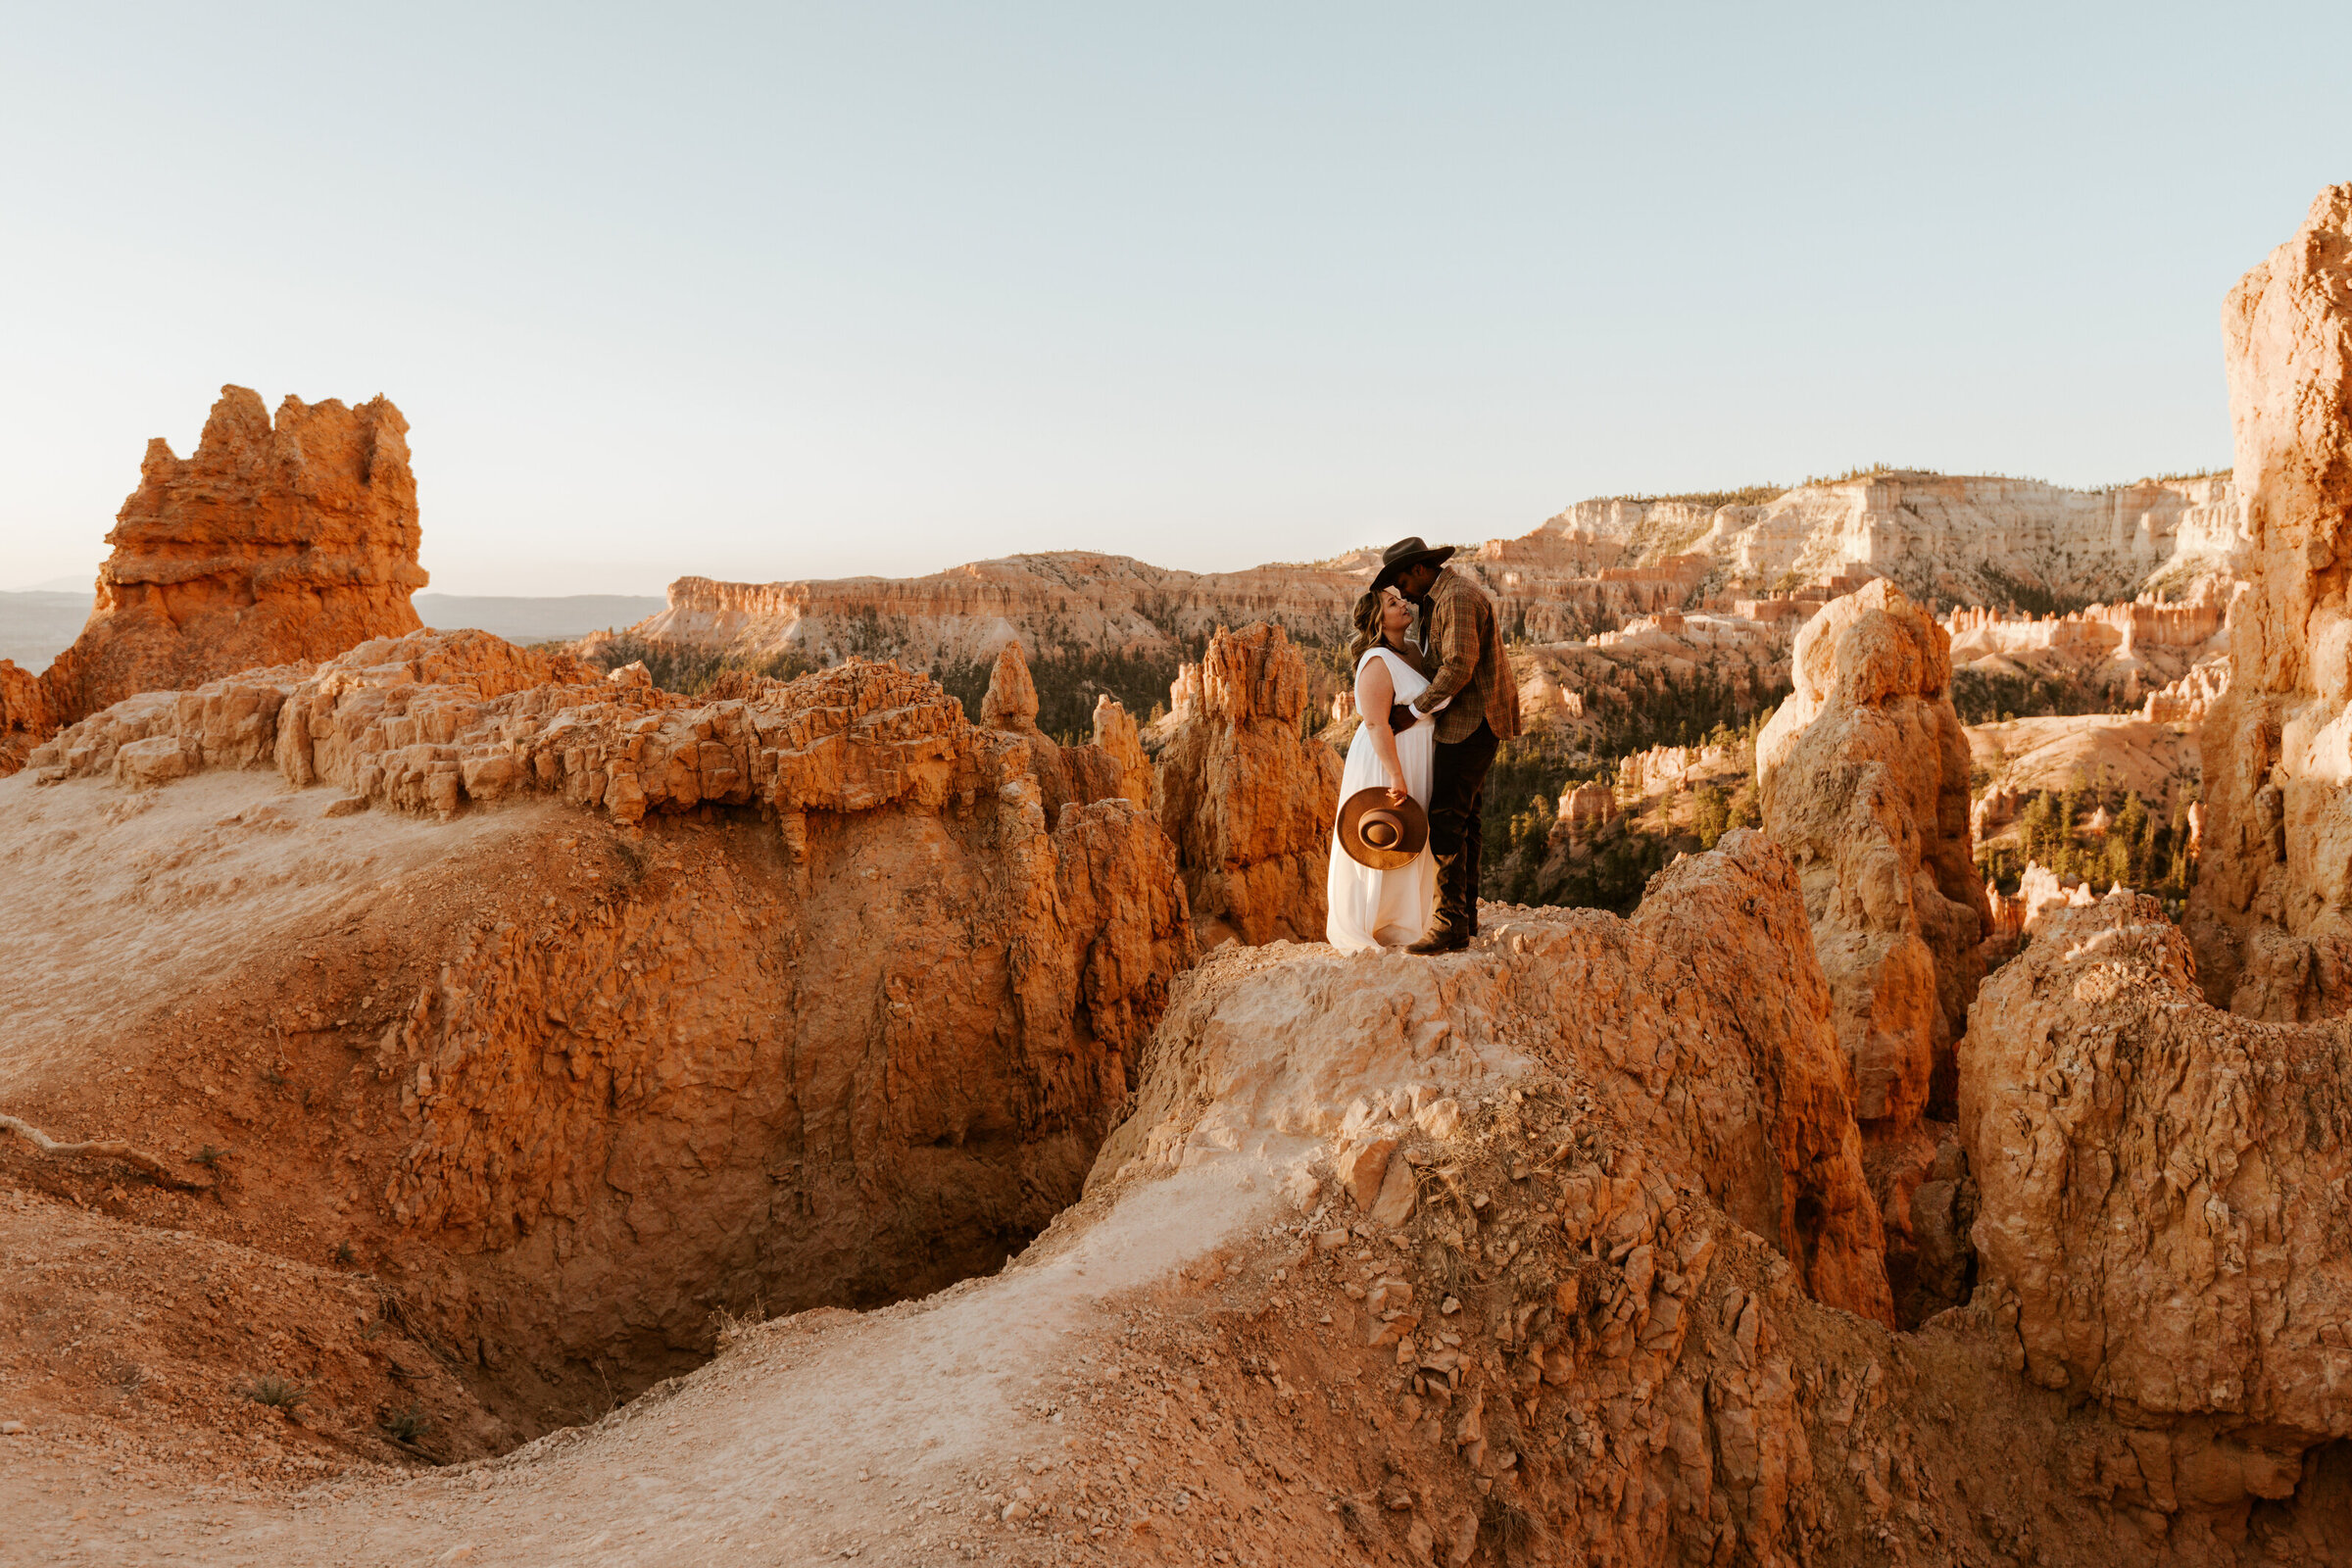 Elopement photography in Southern Utah at Bryce Canyon National Park.